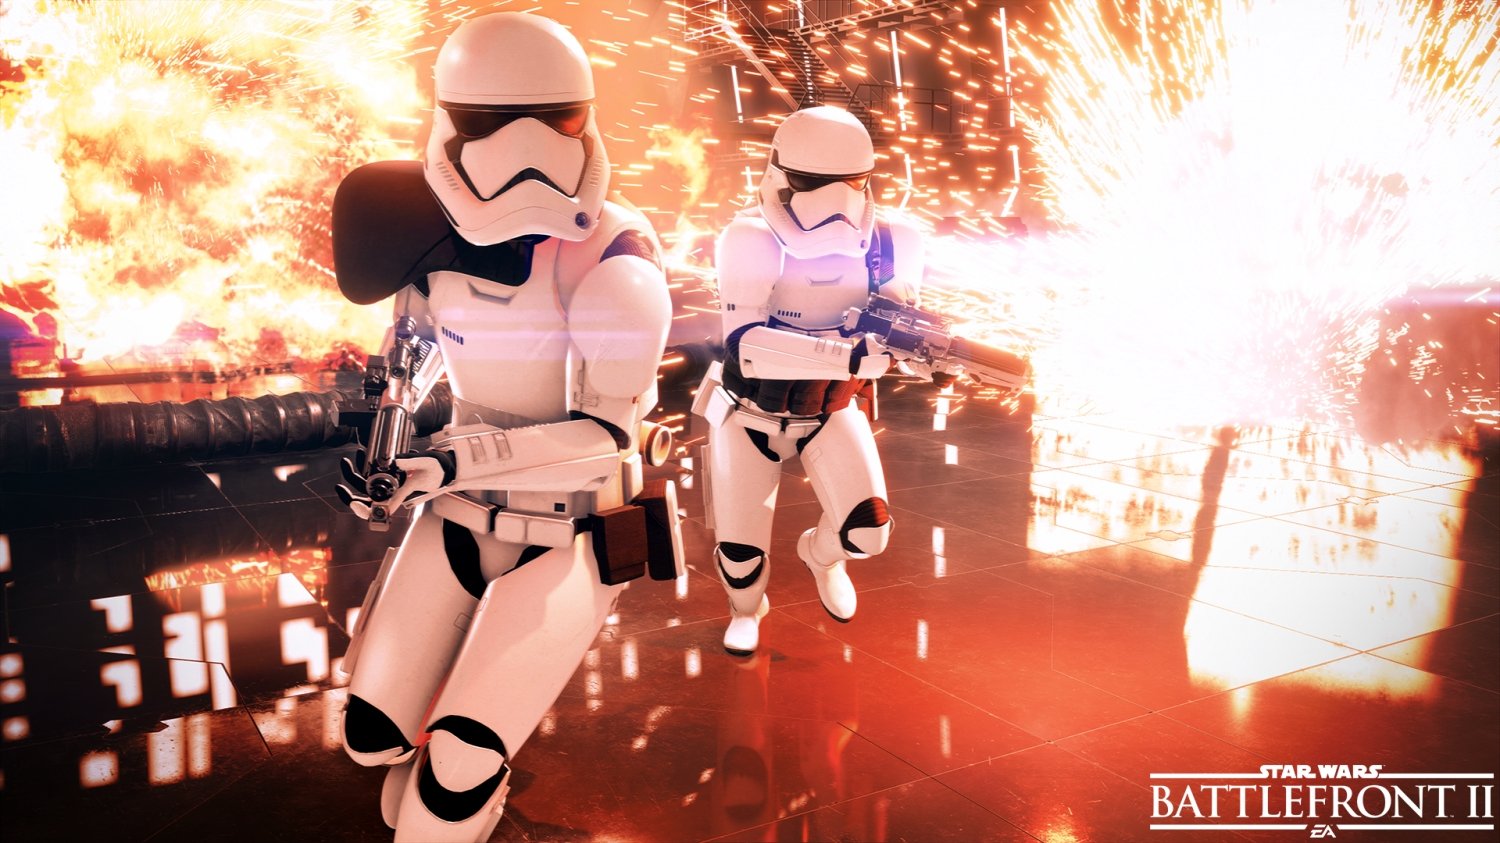 Star Wars Battlefront II Adds A Wealth Of New Content, Including More  Cooperative Play - Game Informer